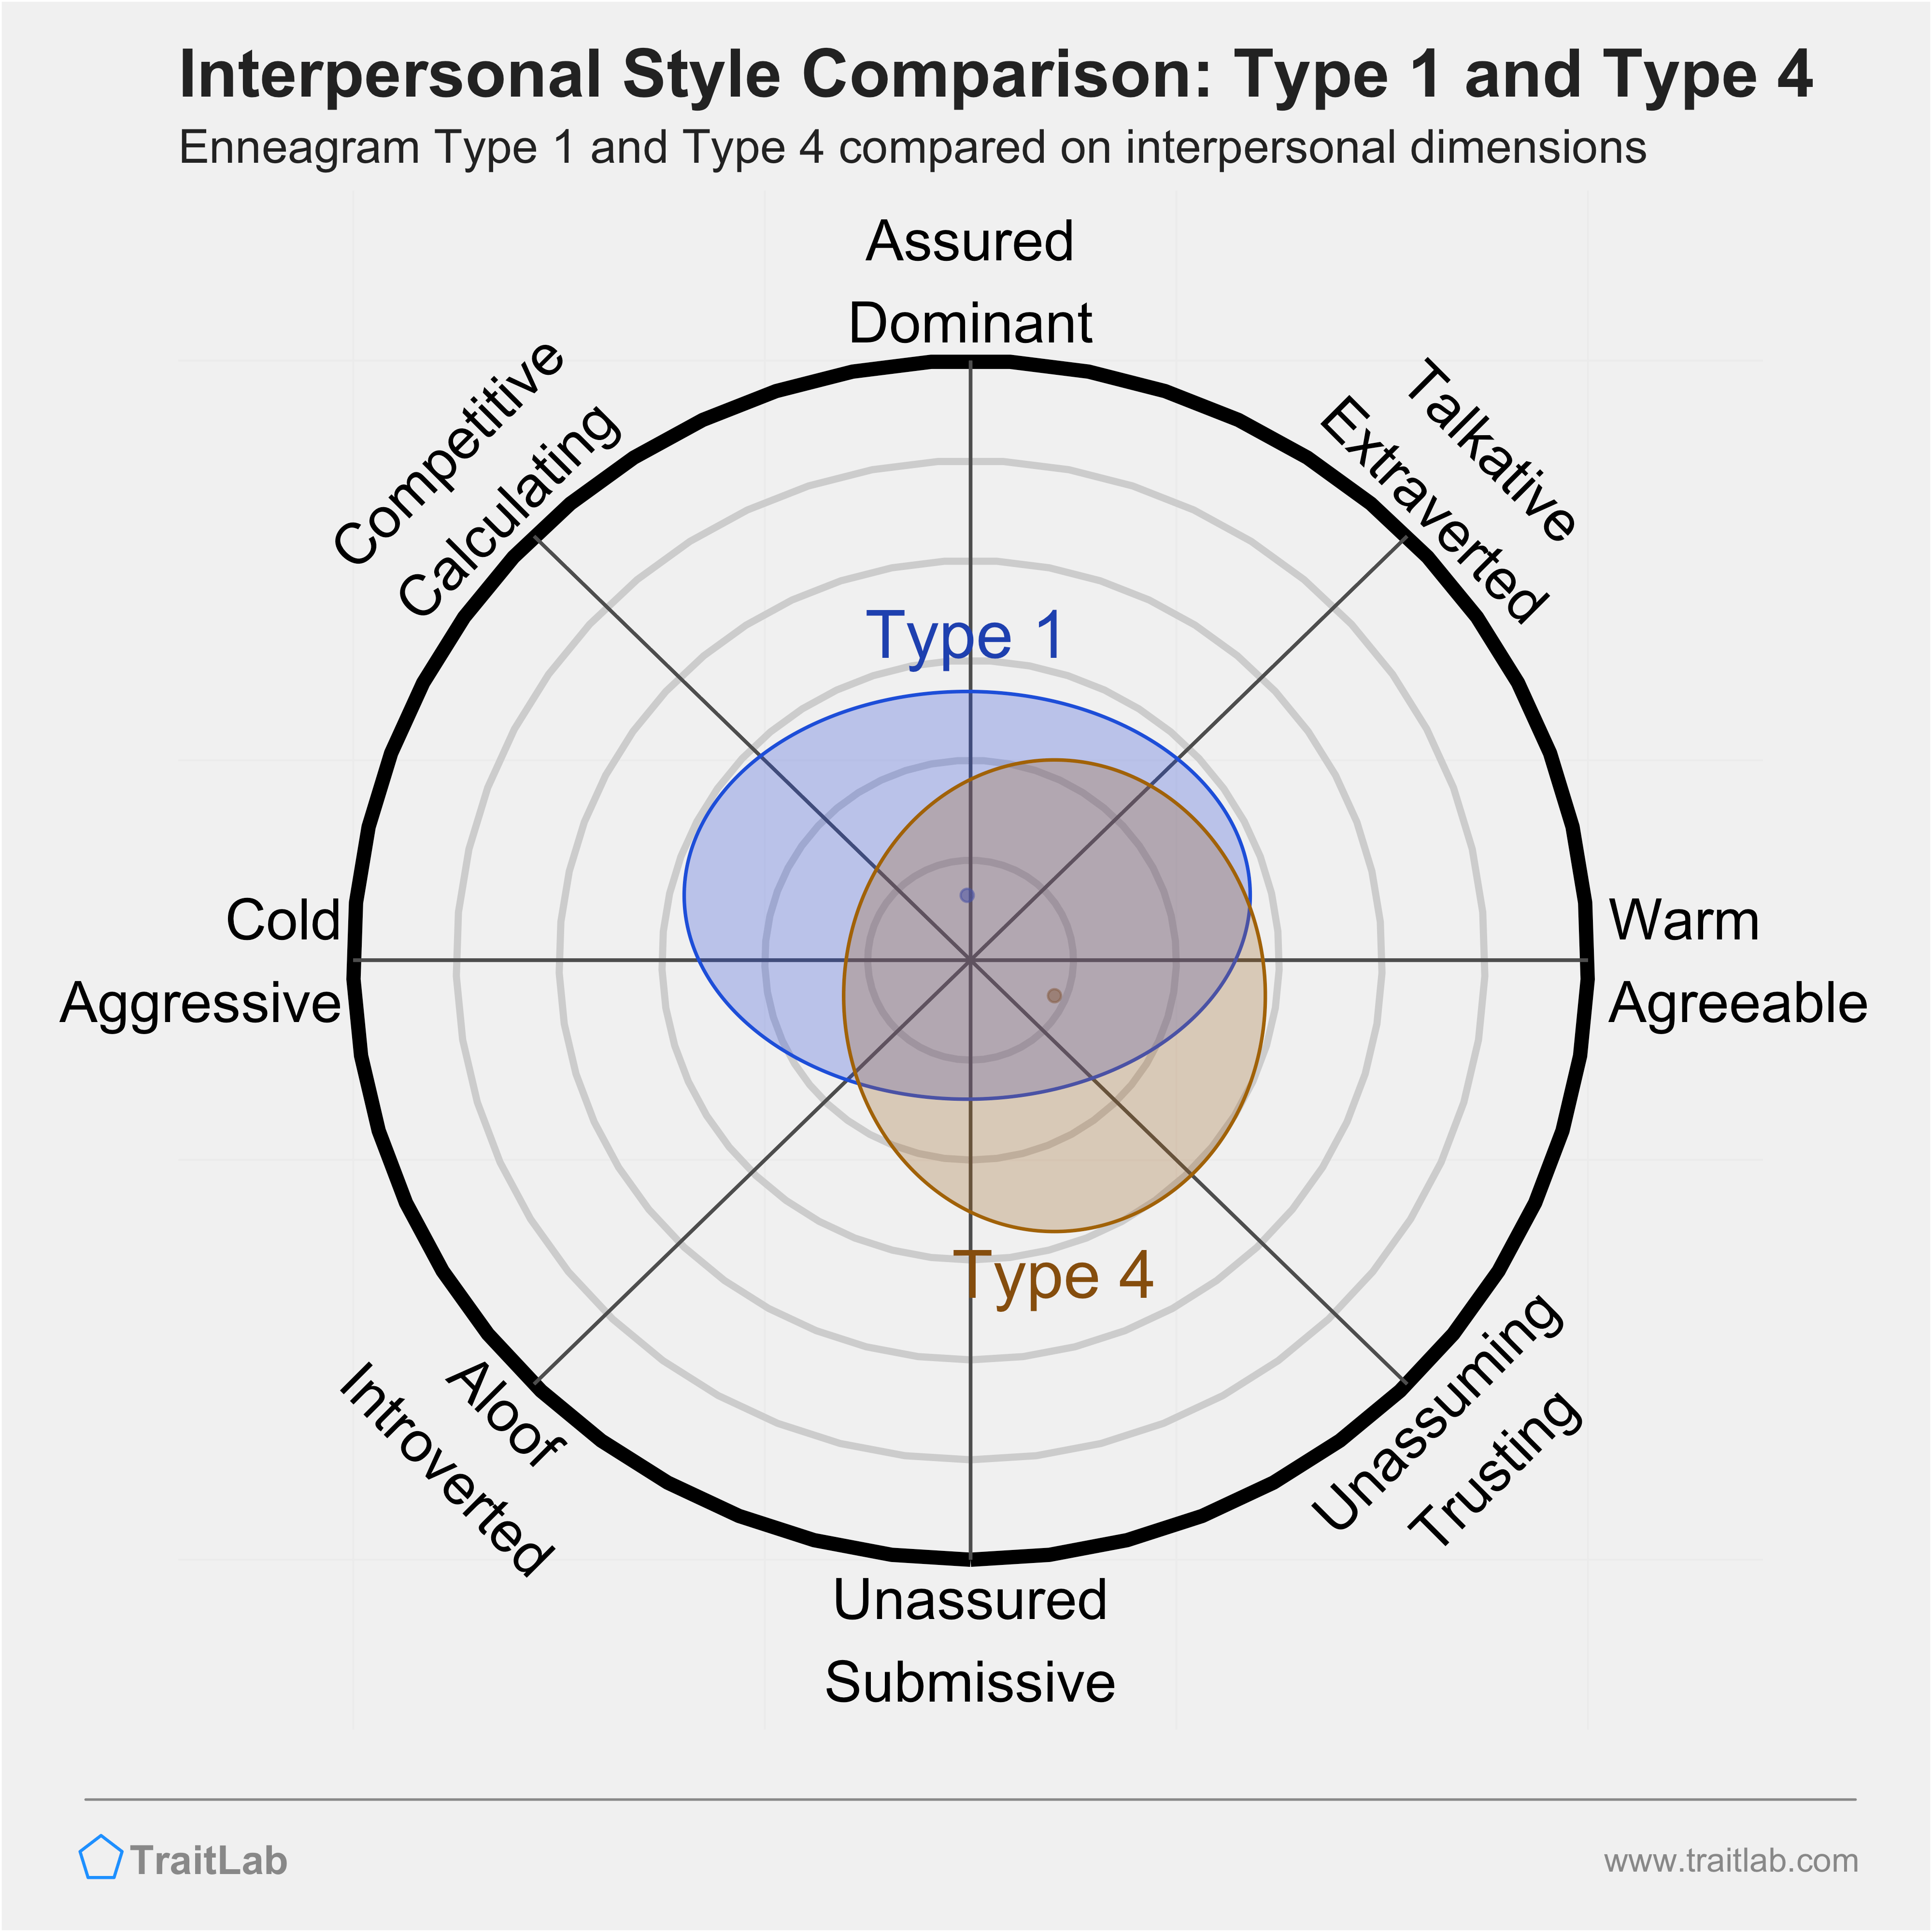 Enneagram Type 1 and Type 4 comparison across interpersonal dimensions